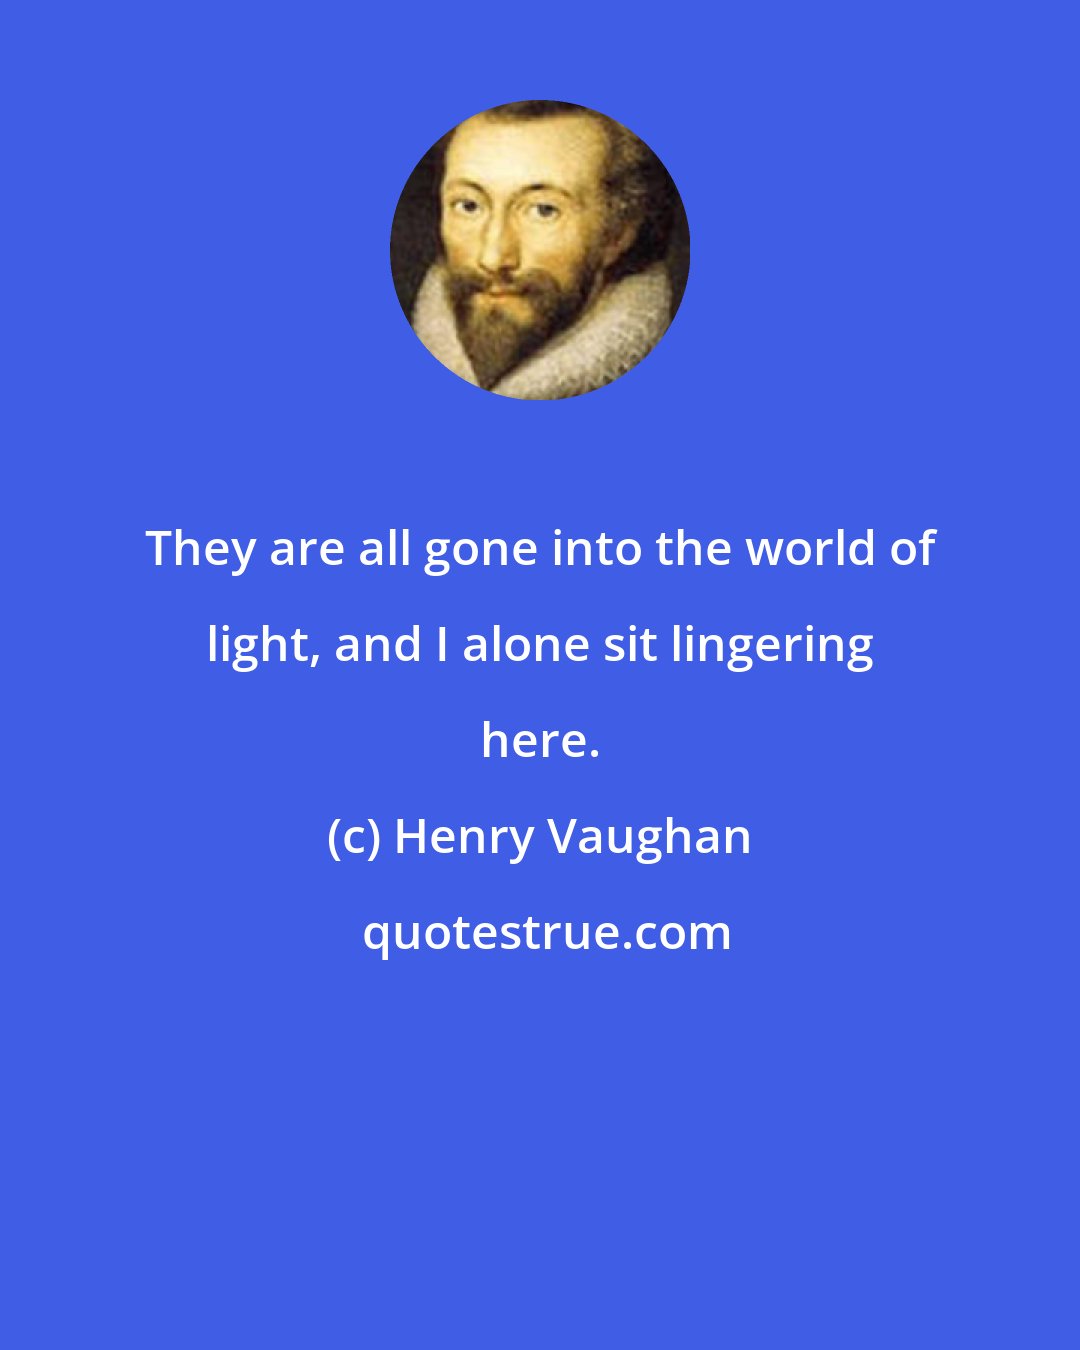 Henry Vaughan: They are all gone into the world of light, and I alone sit lingering here.